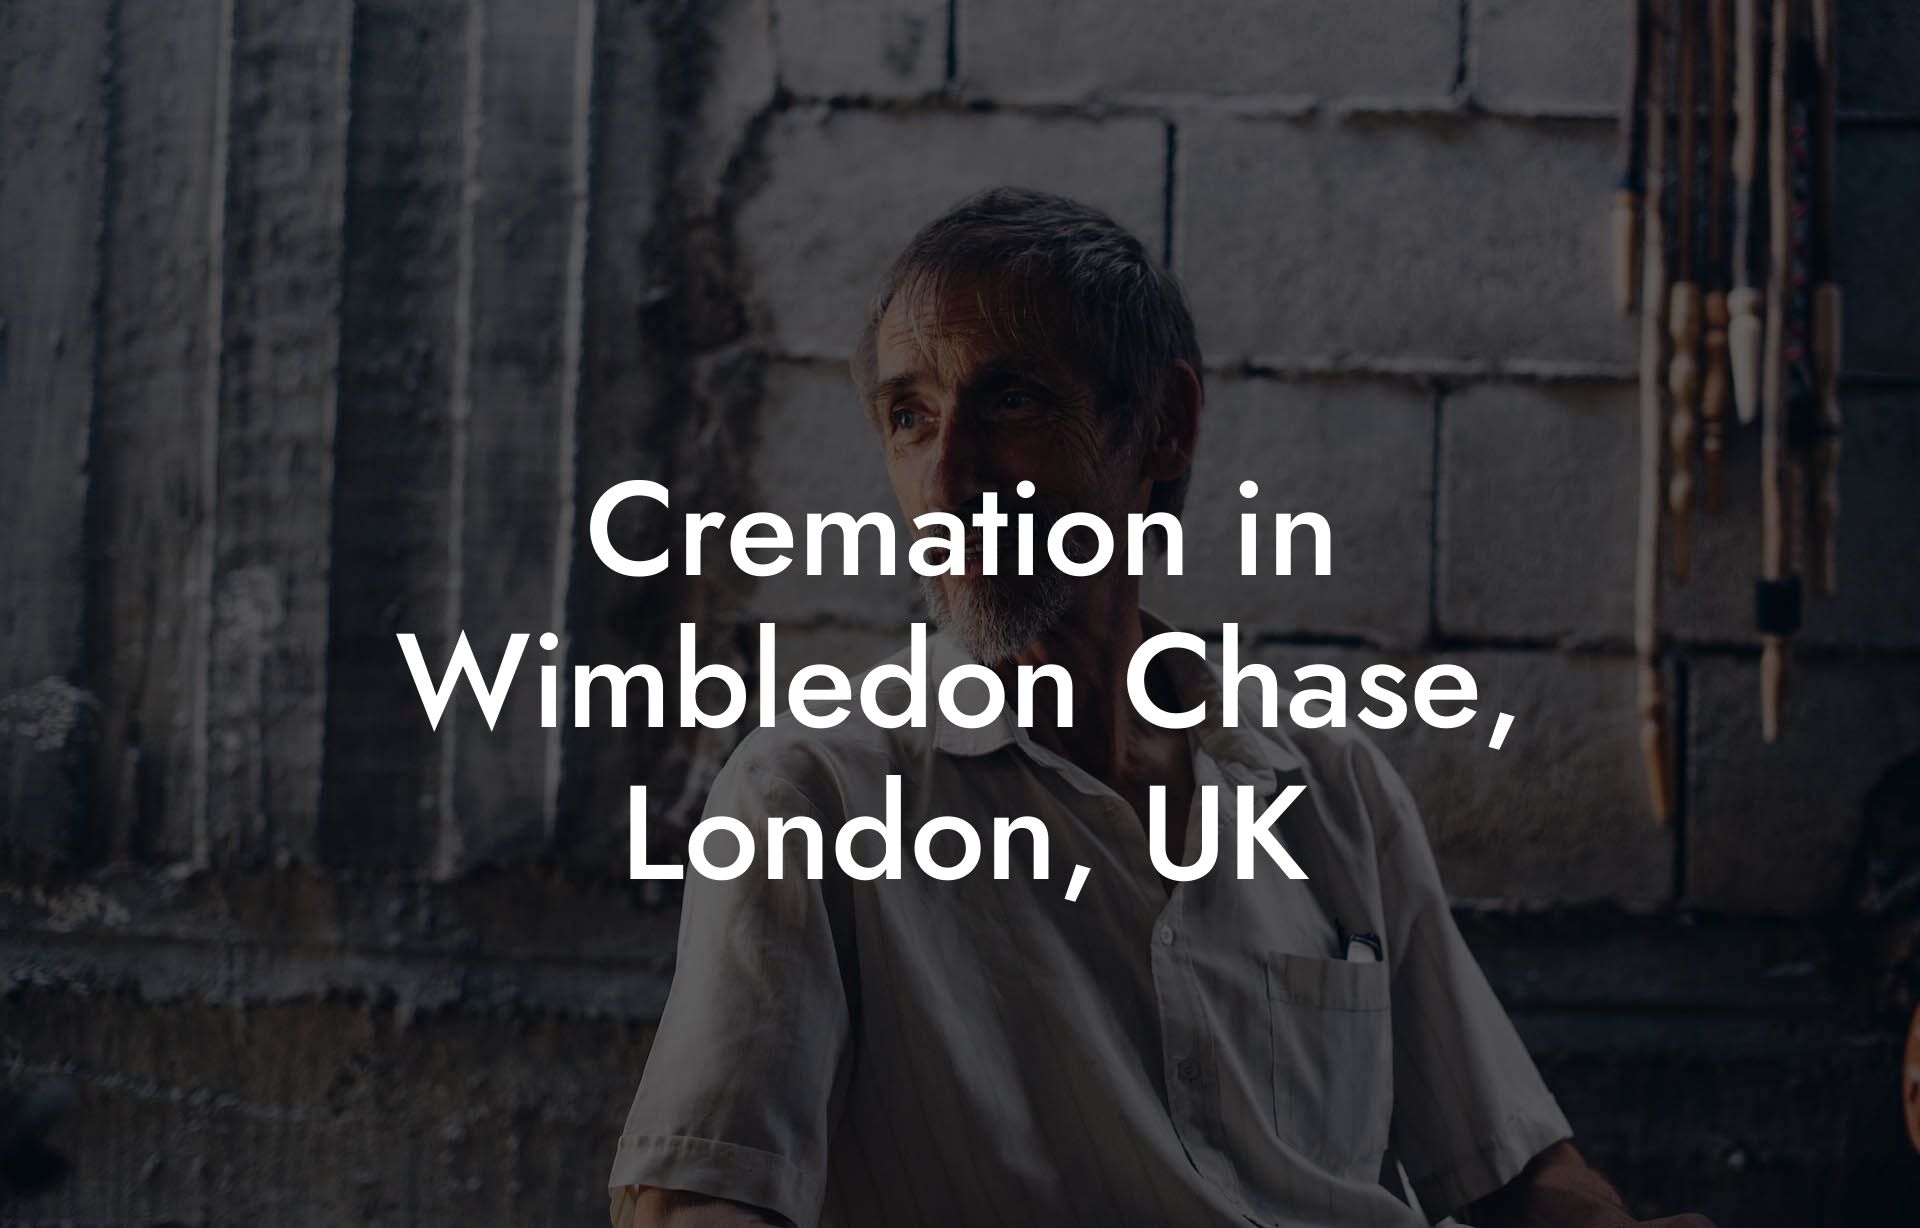 Cremation in Wimbledon Chase, London, UK